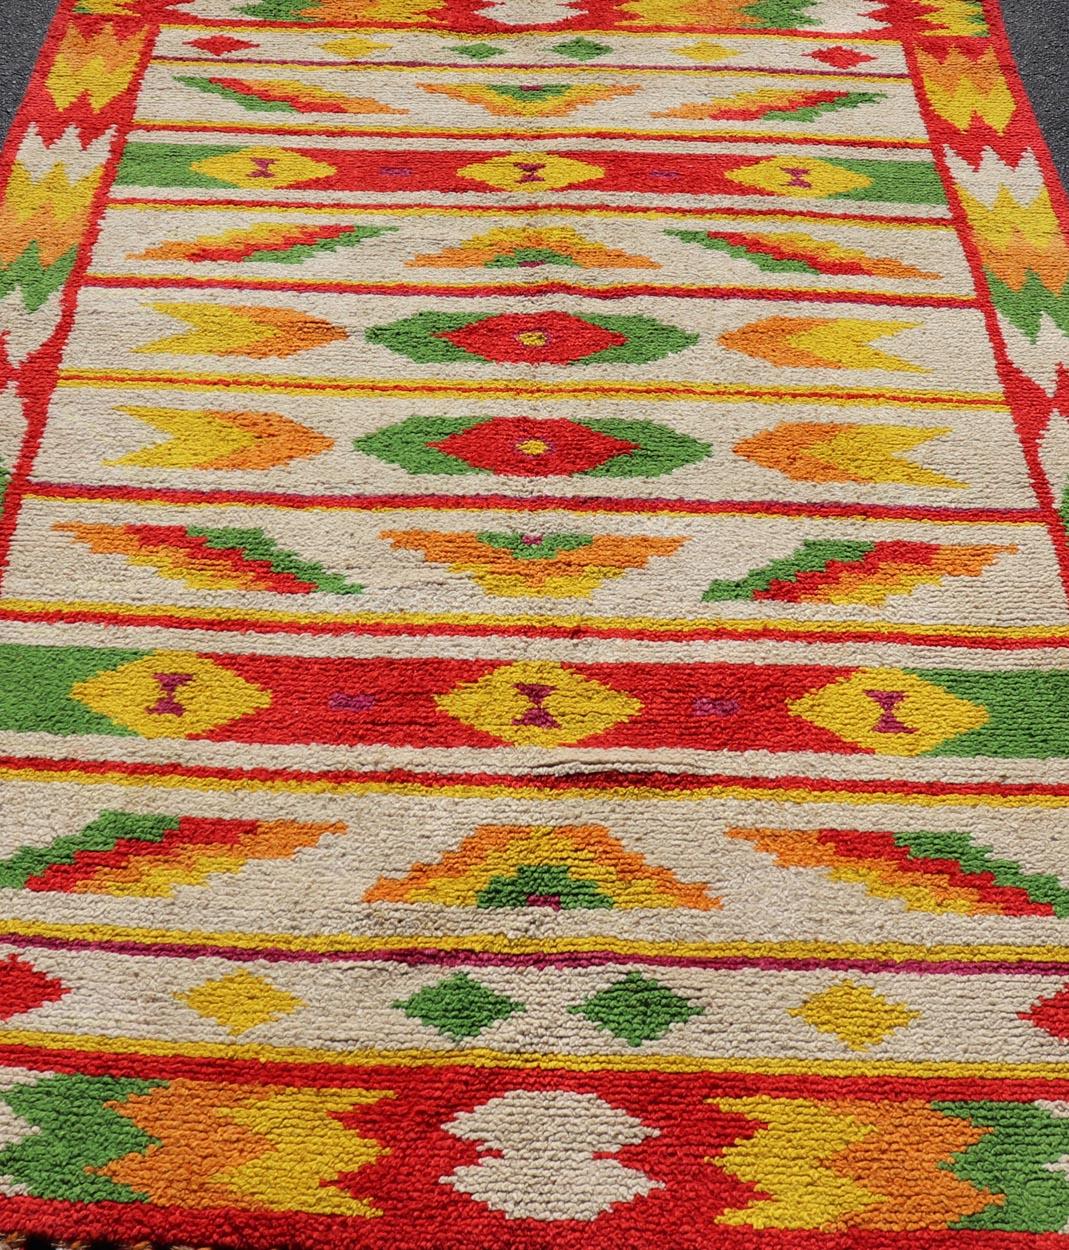 Vintage Moroccan Rug with All-Over Tribal Motif Design In Red, Green & Yellow For Sale 6